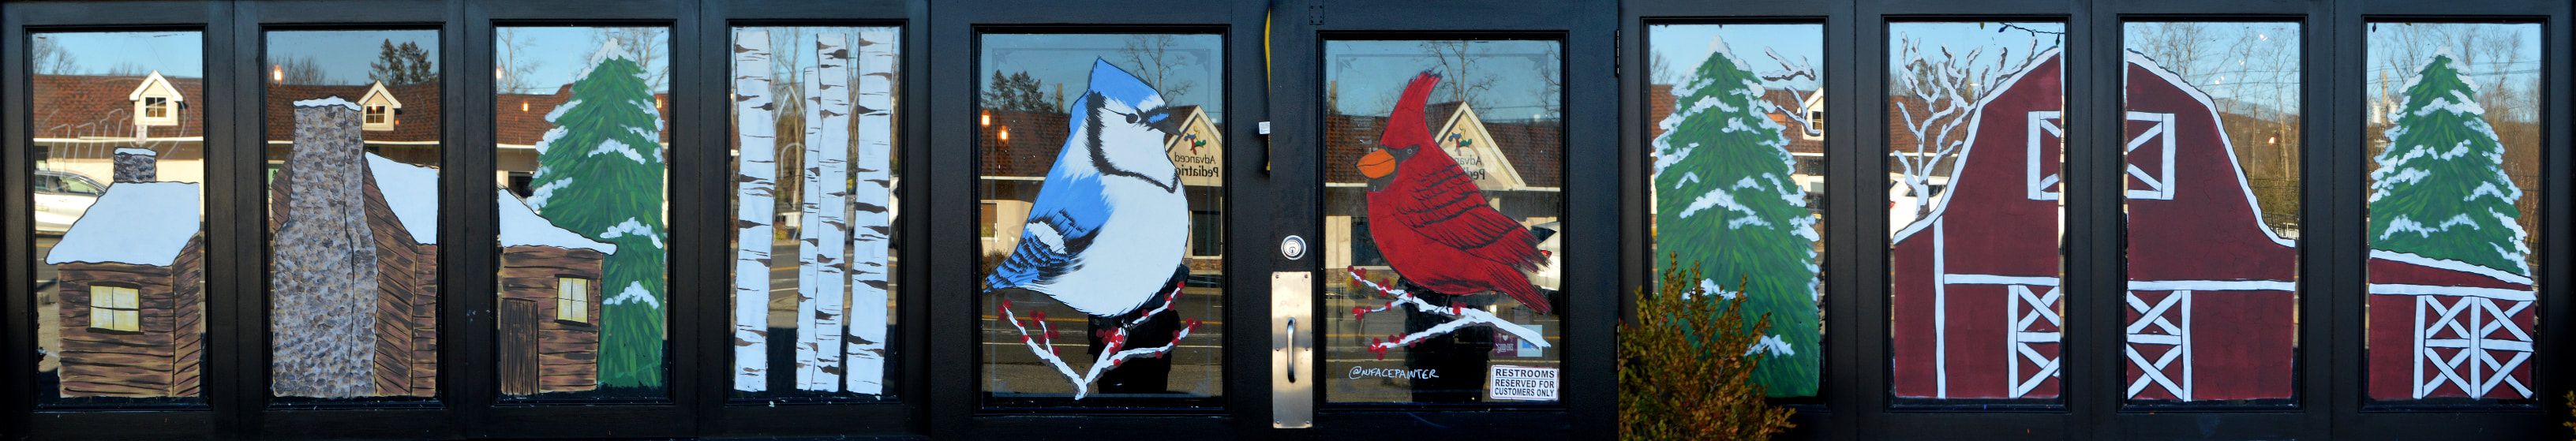 Winter Window Painting at The Copper Still in Pomona, Rockland County, NY featuring a barn, a log cabin, a bluejay, and a cardinal